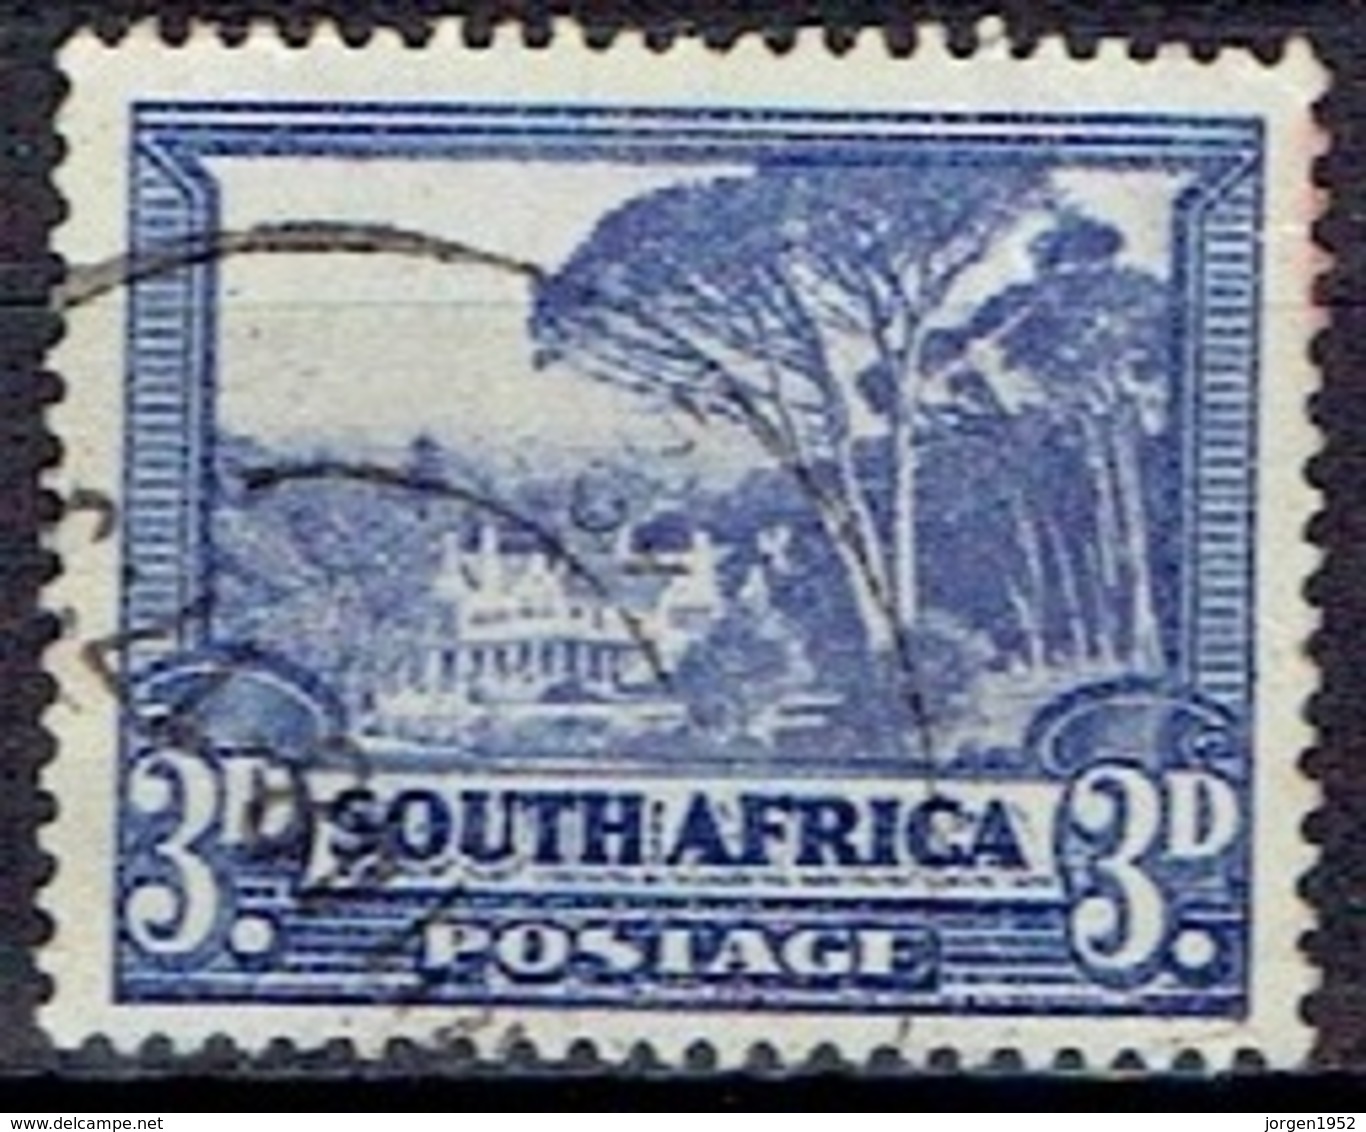 GREAT BRITAIN # SOUTH AFRICA FROM 1930-45  STAMPWORLD 56 - New Republic (1886-1887)